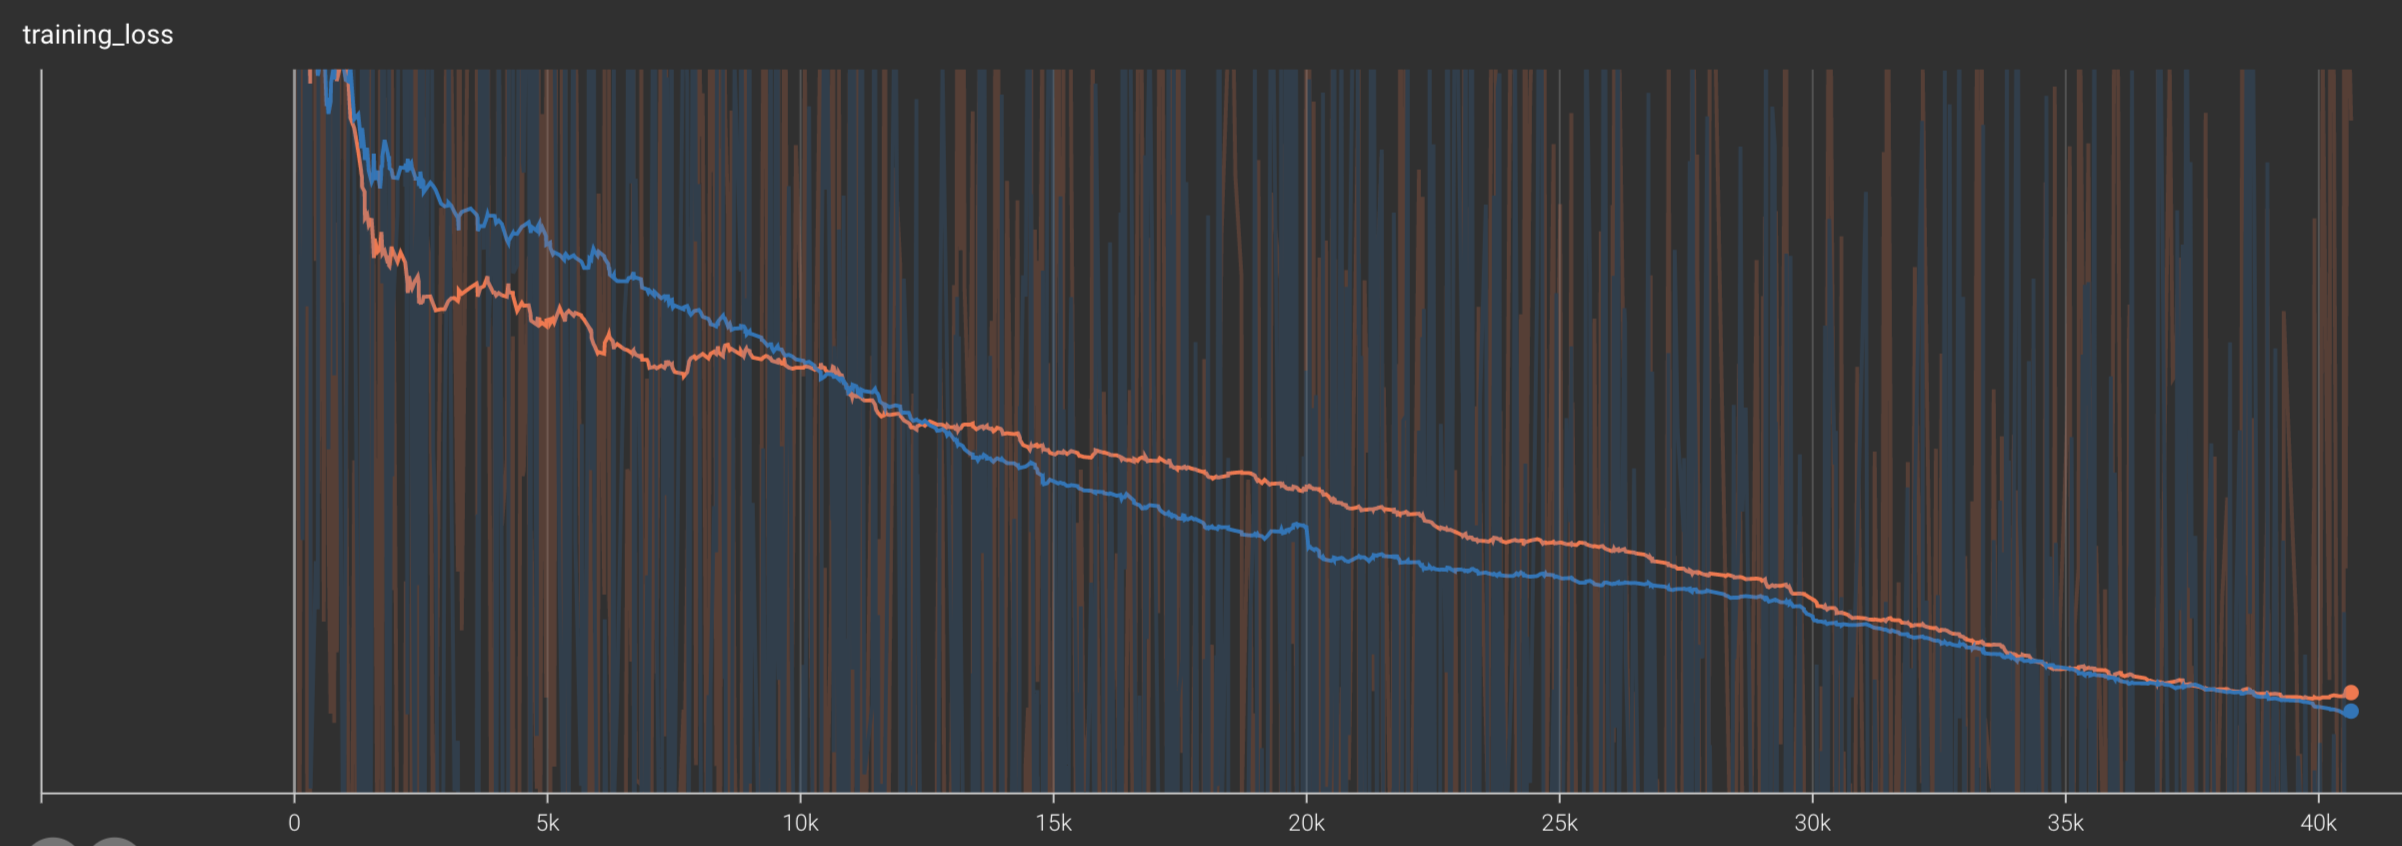 Plot showing the progress of loss on training data as we train the model on more epochs